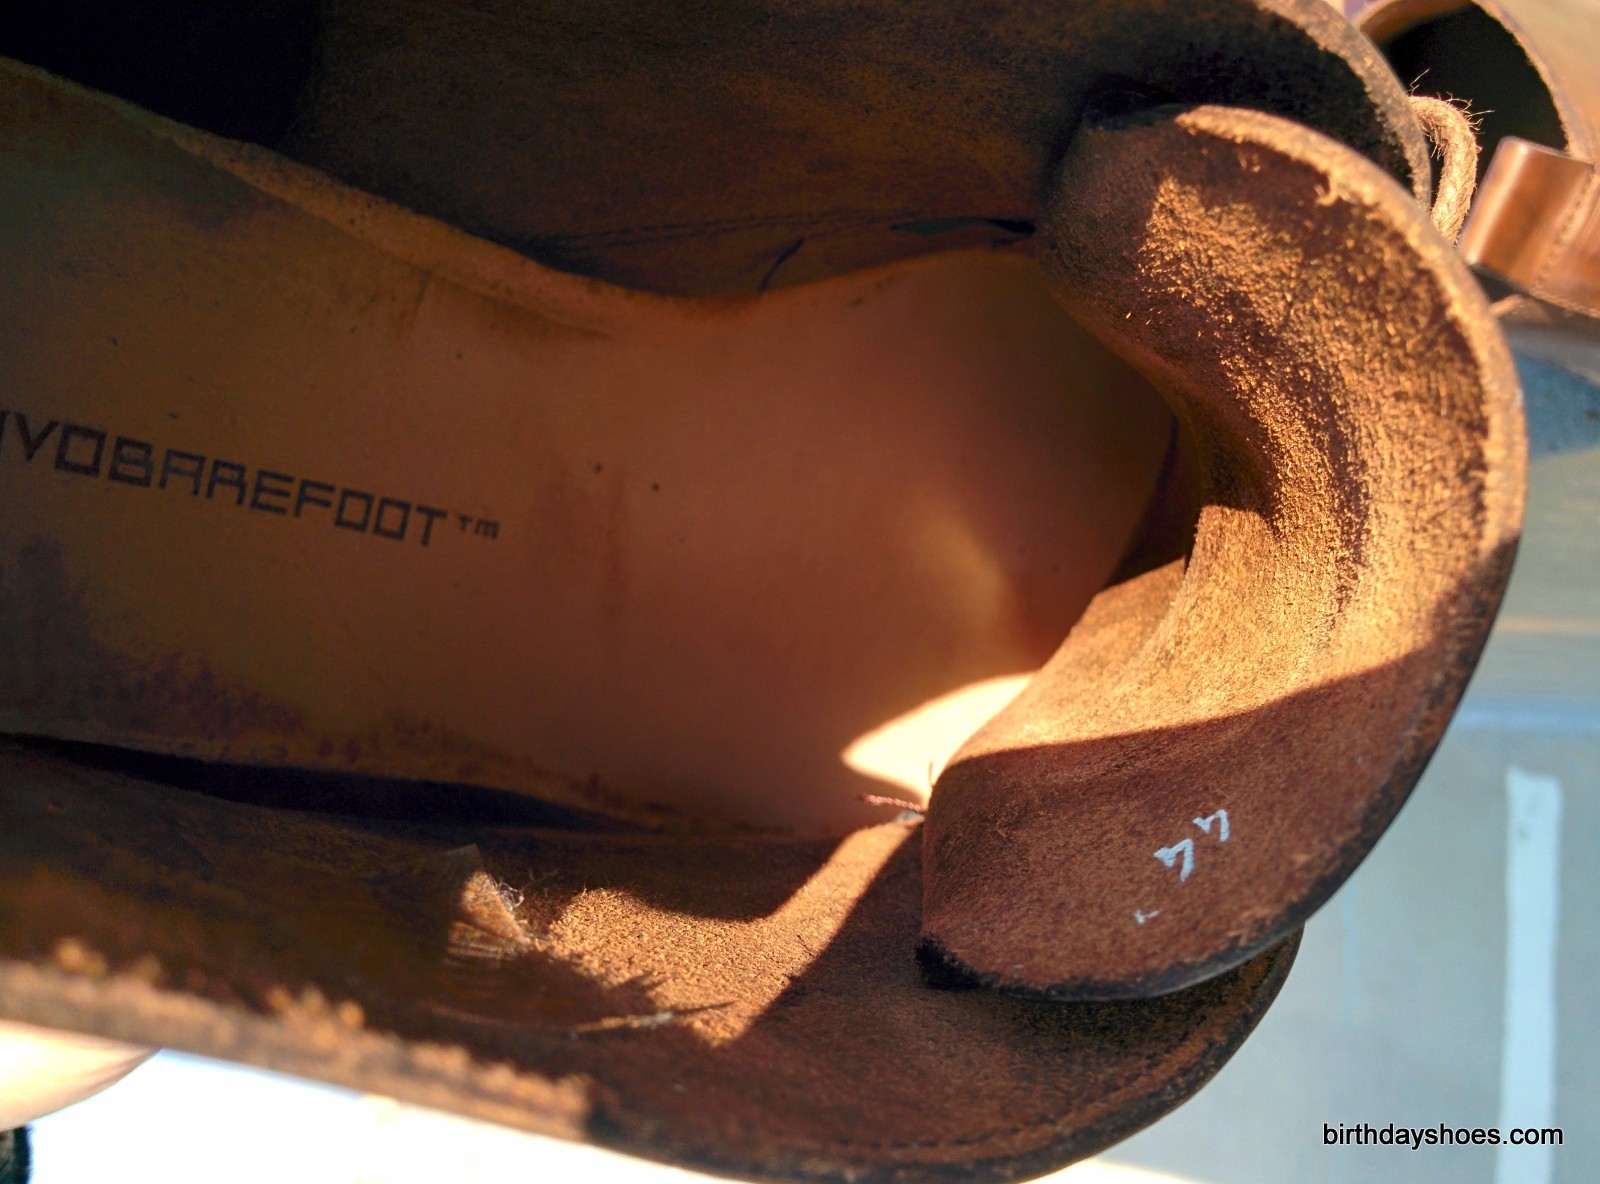 The VivoBarefoot Porto as viewed from above, into the boots. Note they have no removable insole.